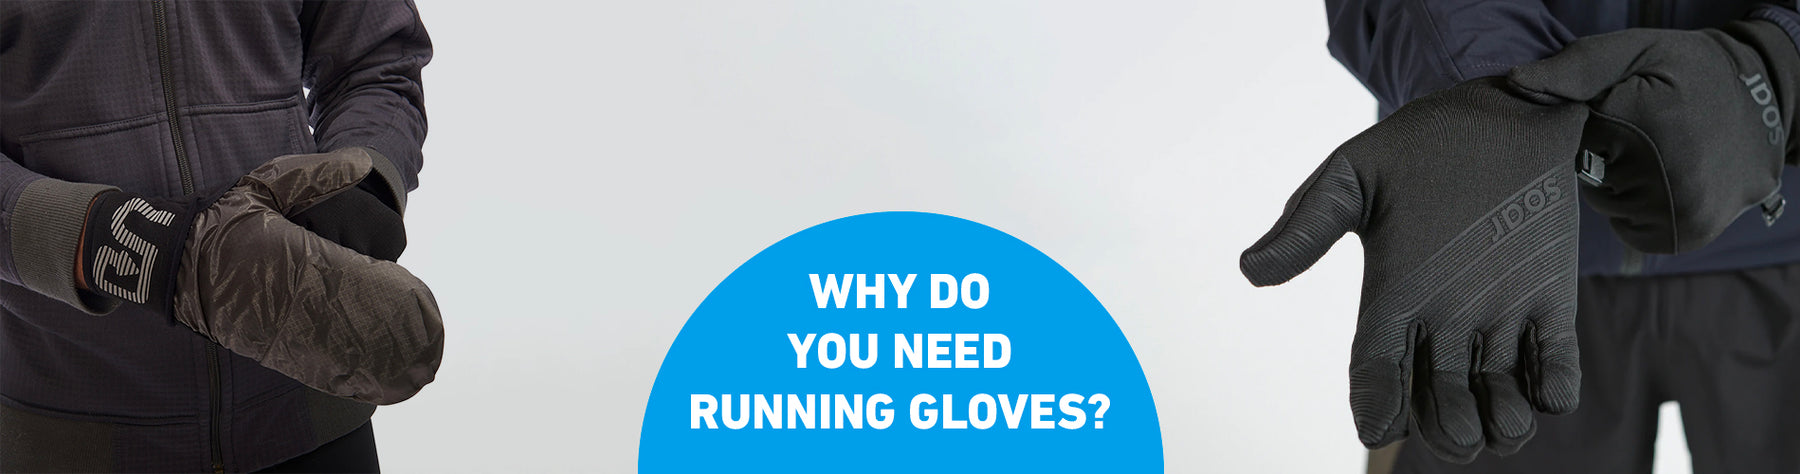 Why do you need running gloves?